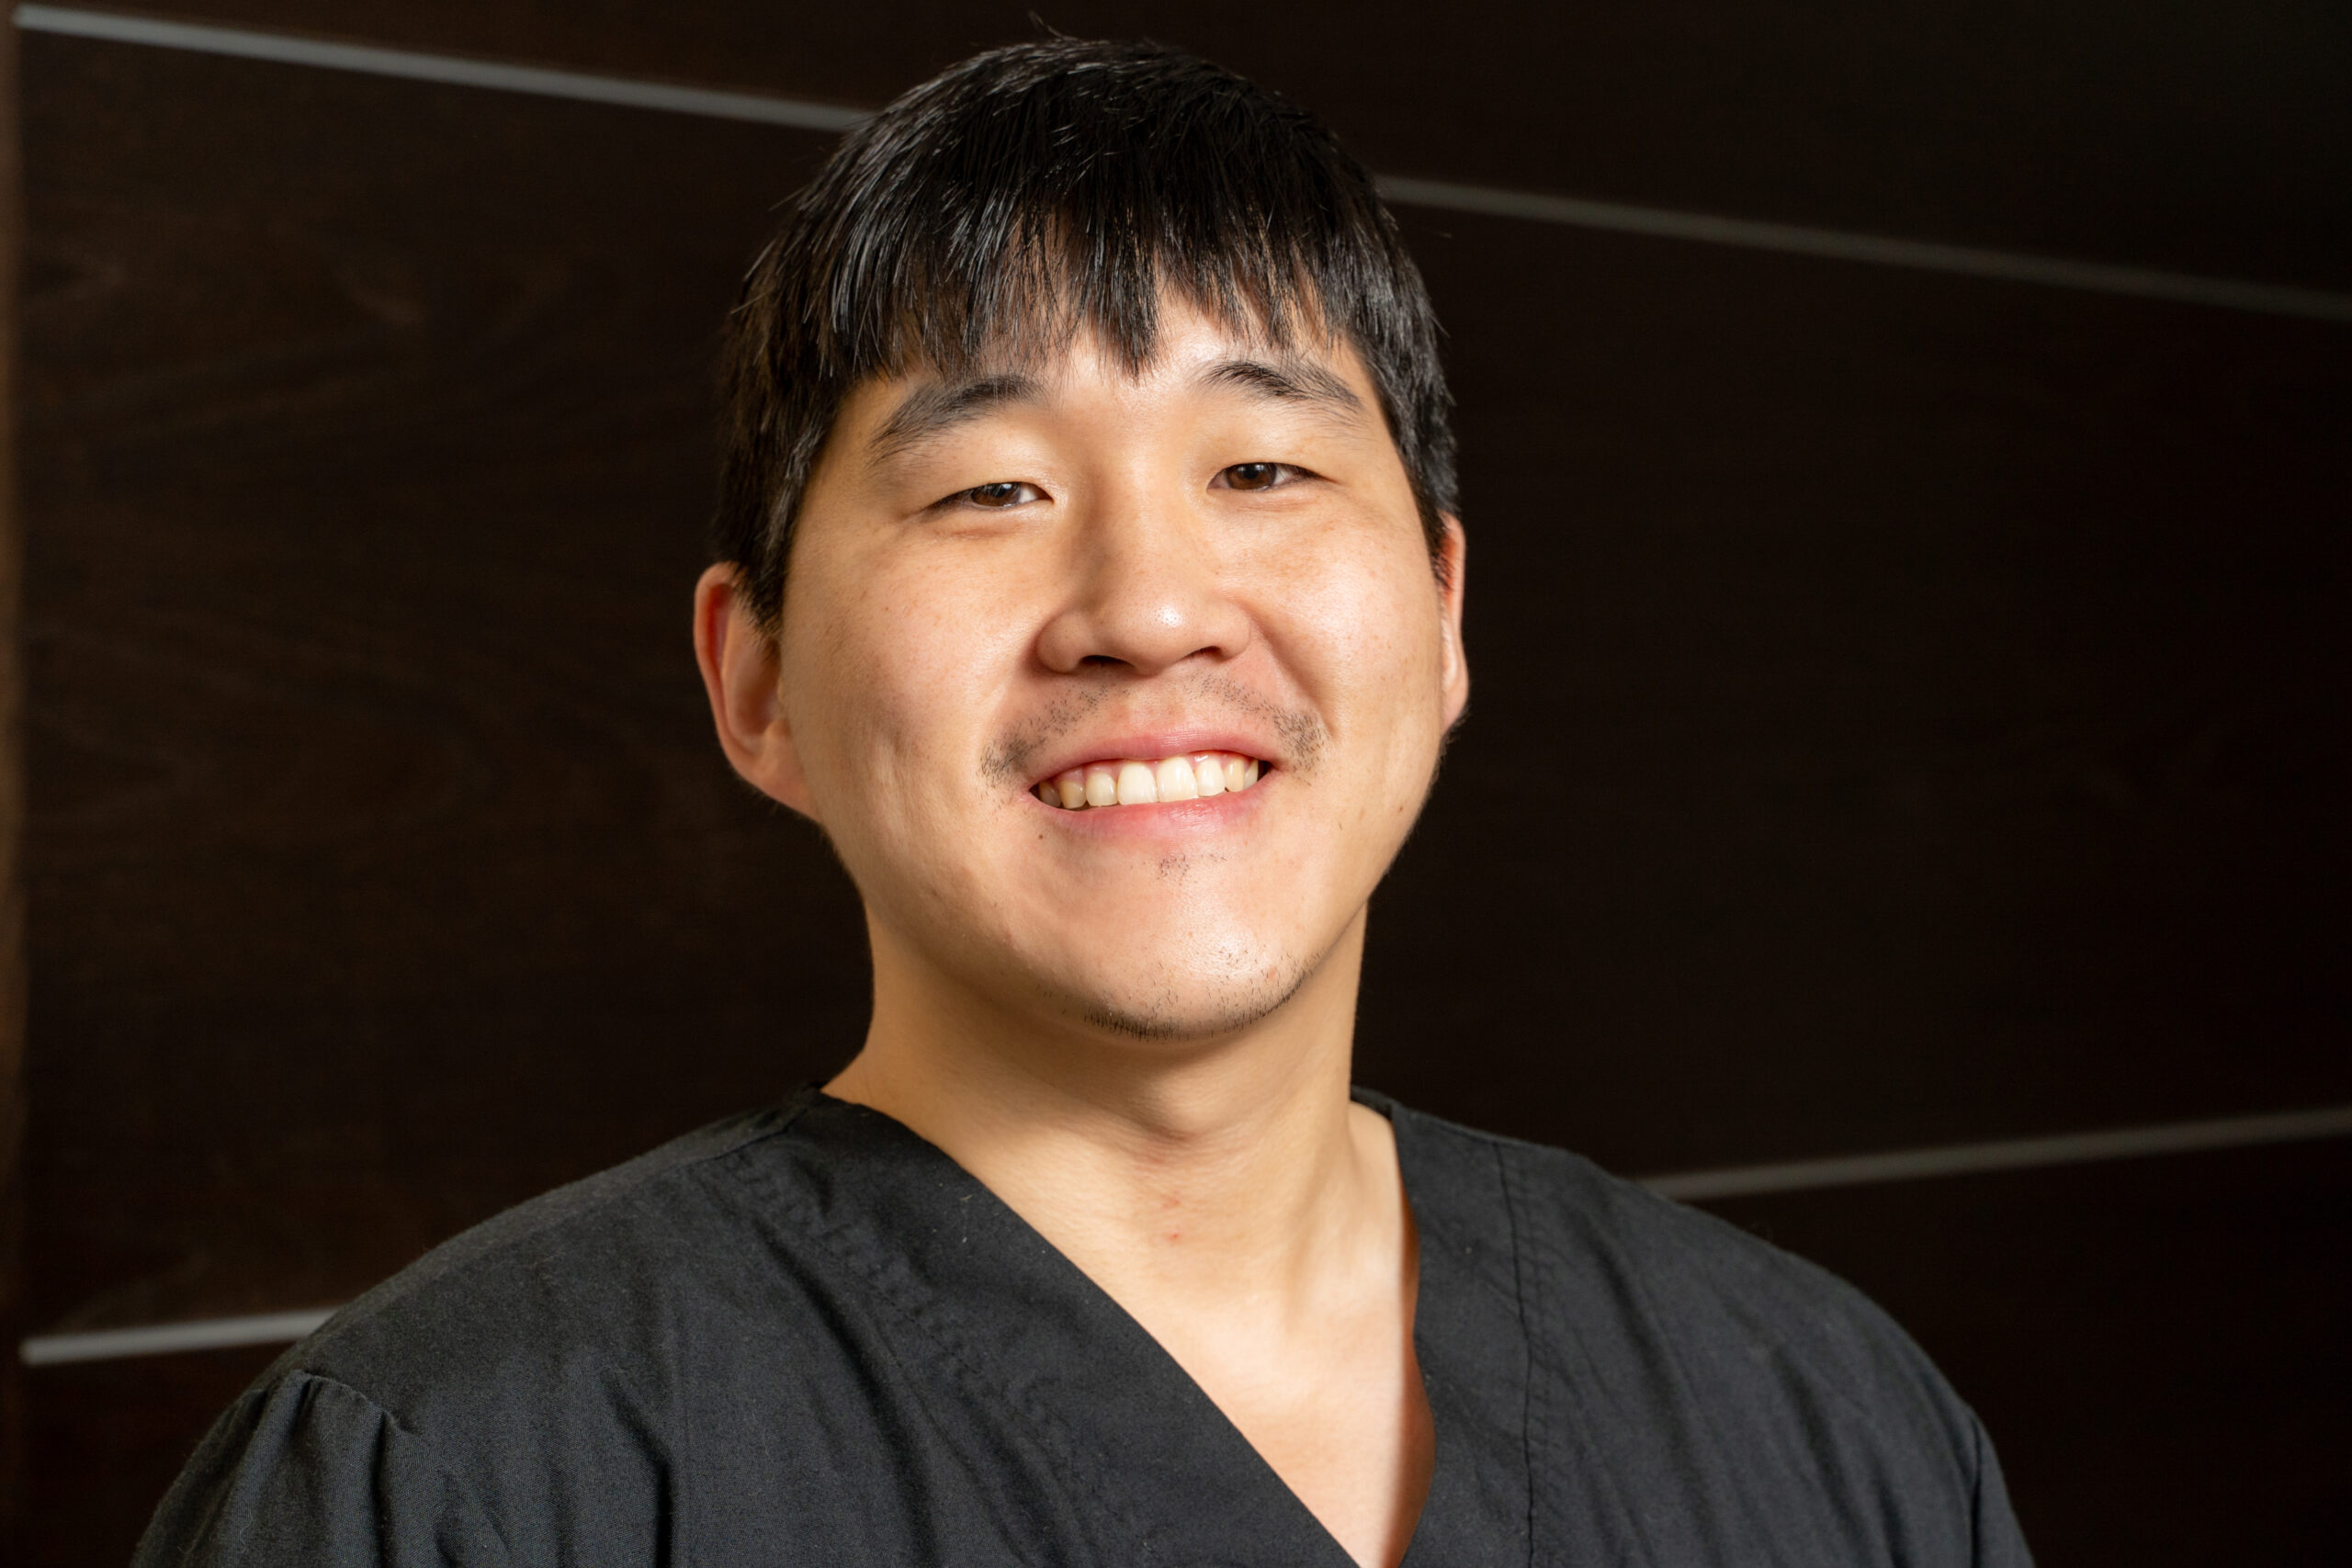 Dr. Kunmin Roo, experienced dentist with a friendly smile, providing exceptional dental care